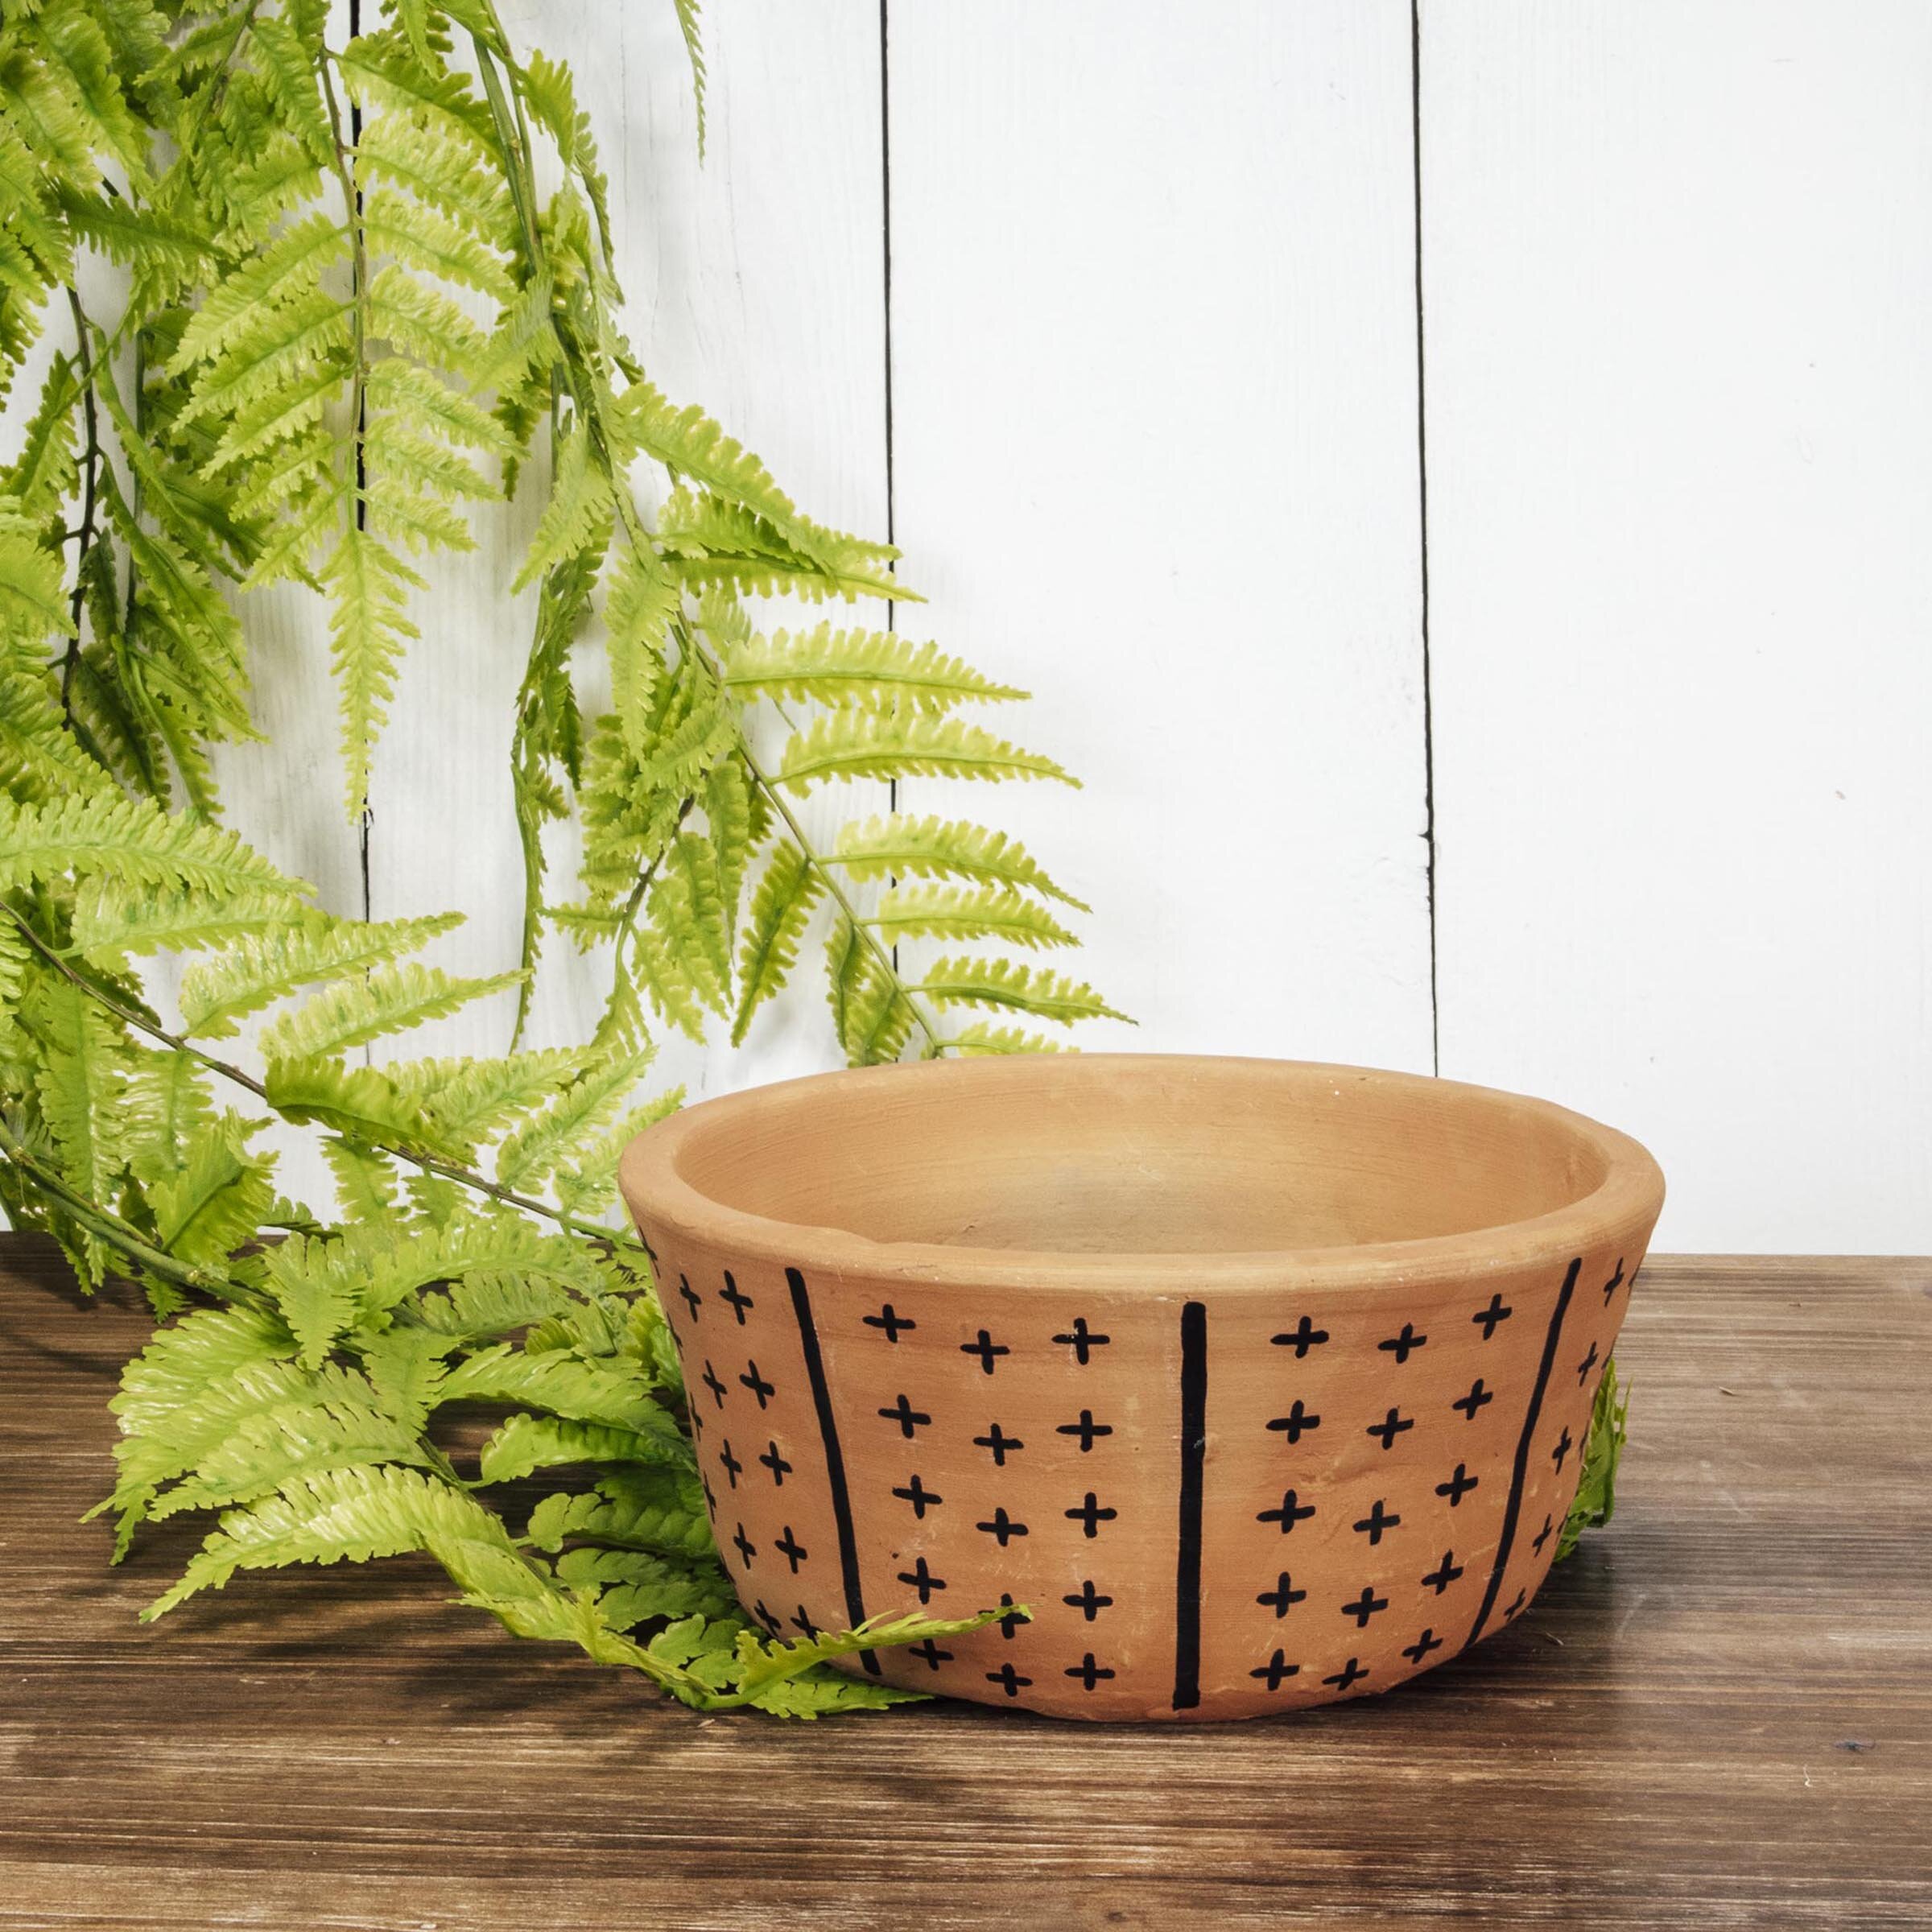 Foreside Home & Garden Natural Handthrown Oval Terracotta Planter with Handpainted Block Pattern